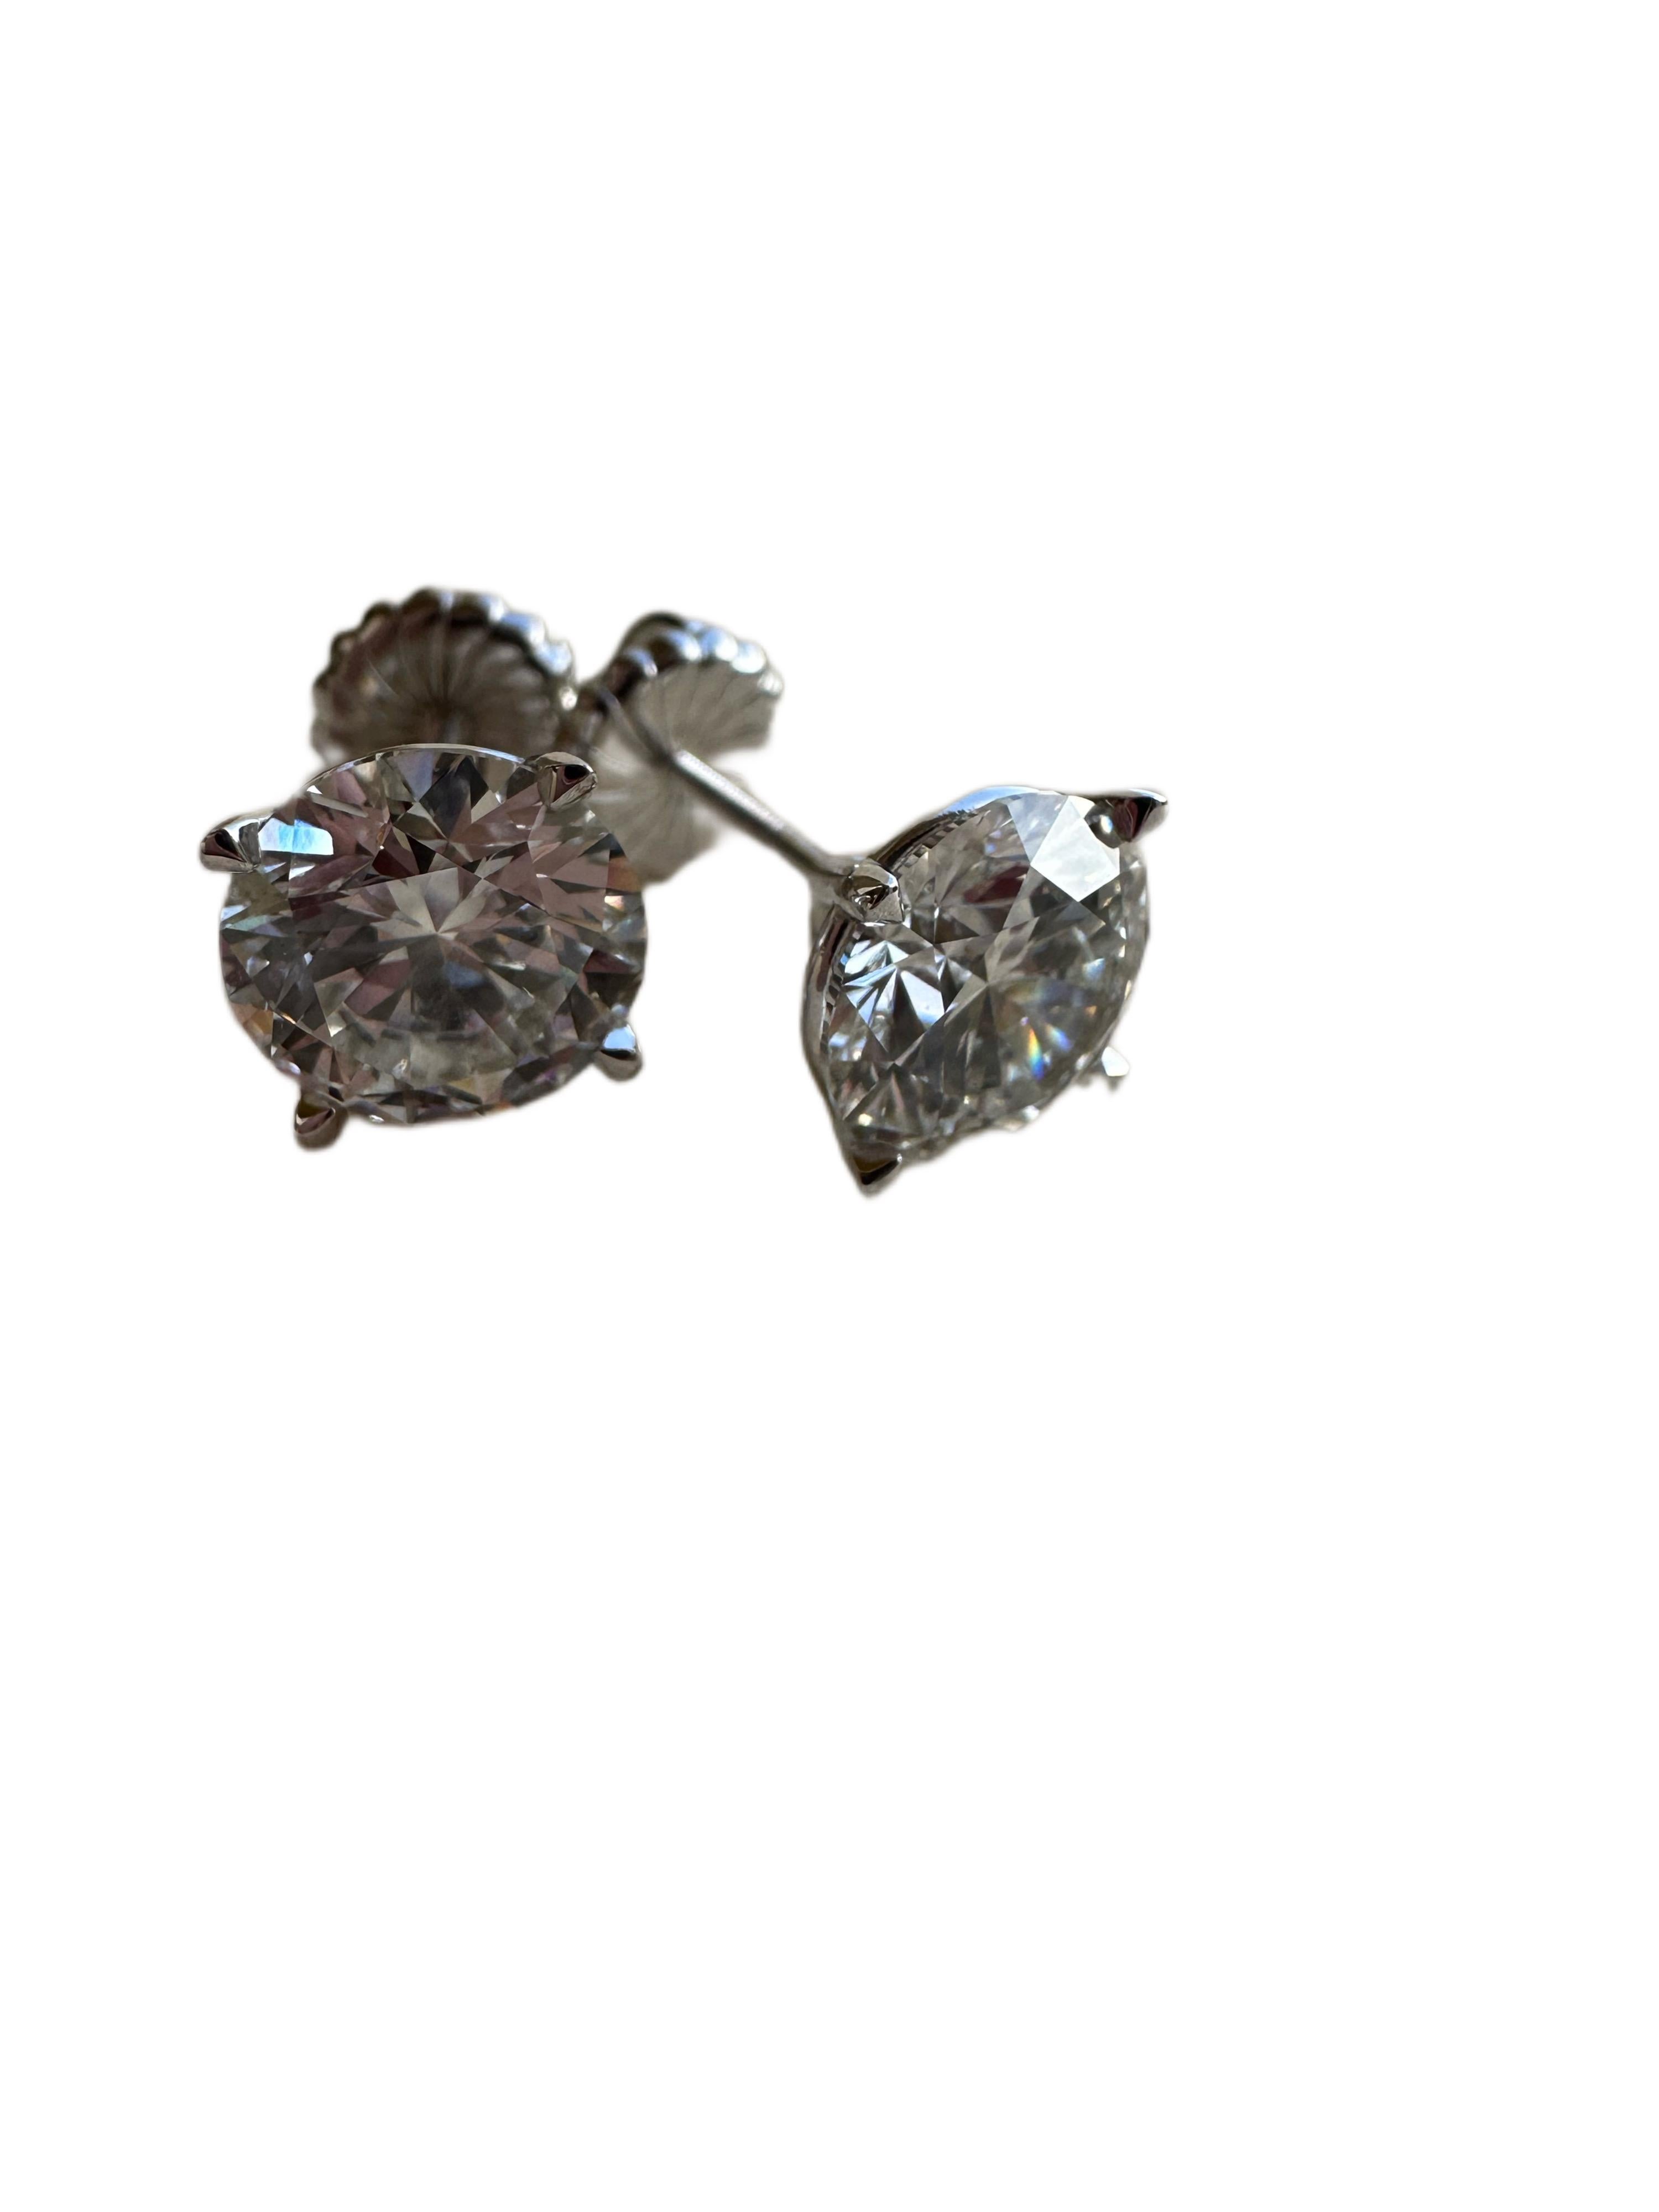 1ct each moissanite studs, certified mossianites with clarity at VVS1 and color F, these look like diamonds for fraction of the price, great for travelling and not worrying to loose a pair of studs, made with screw back in 14KT gold.

Certificate of